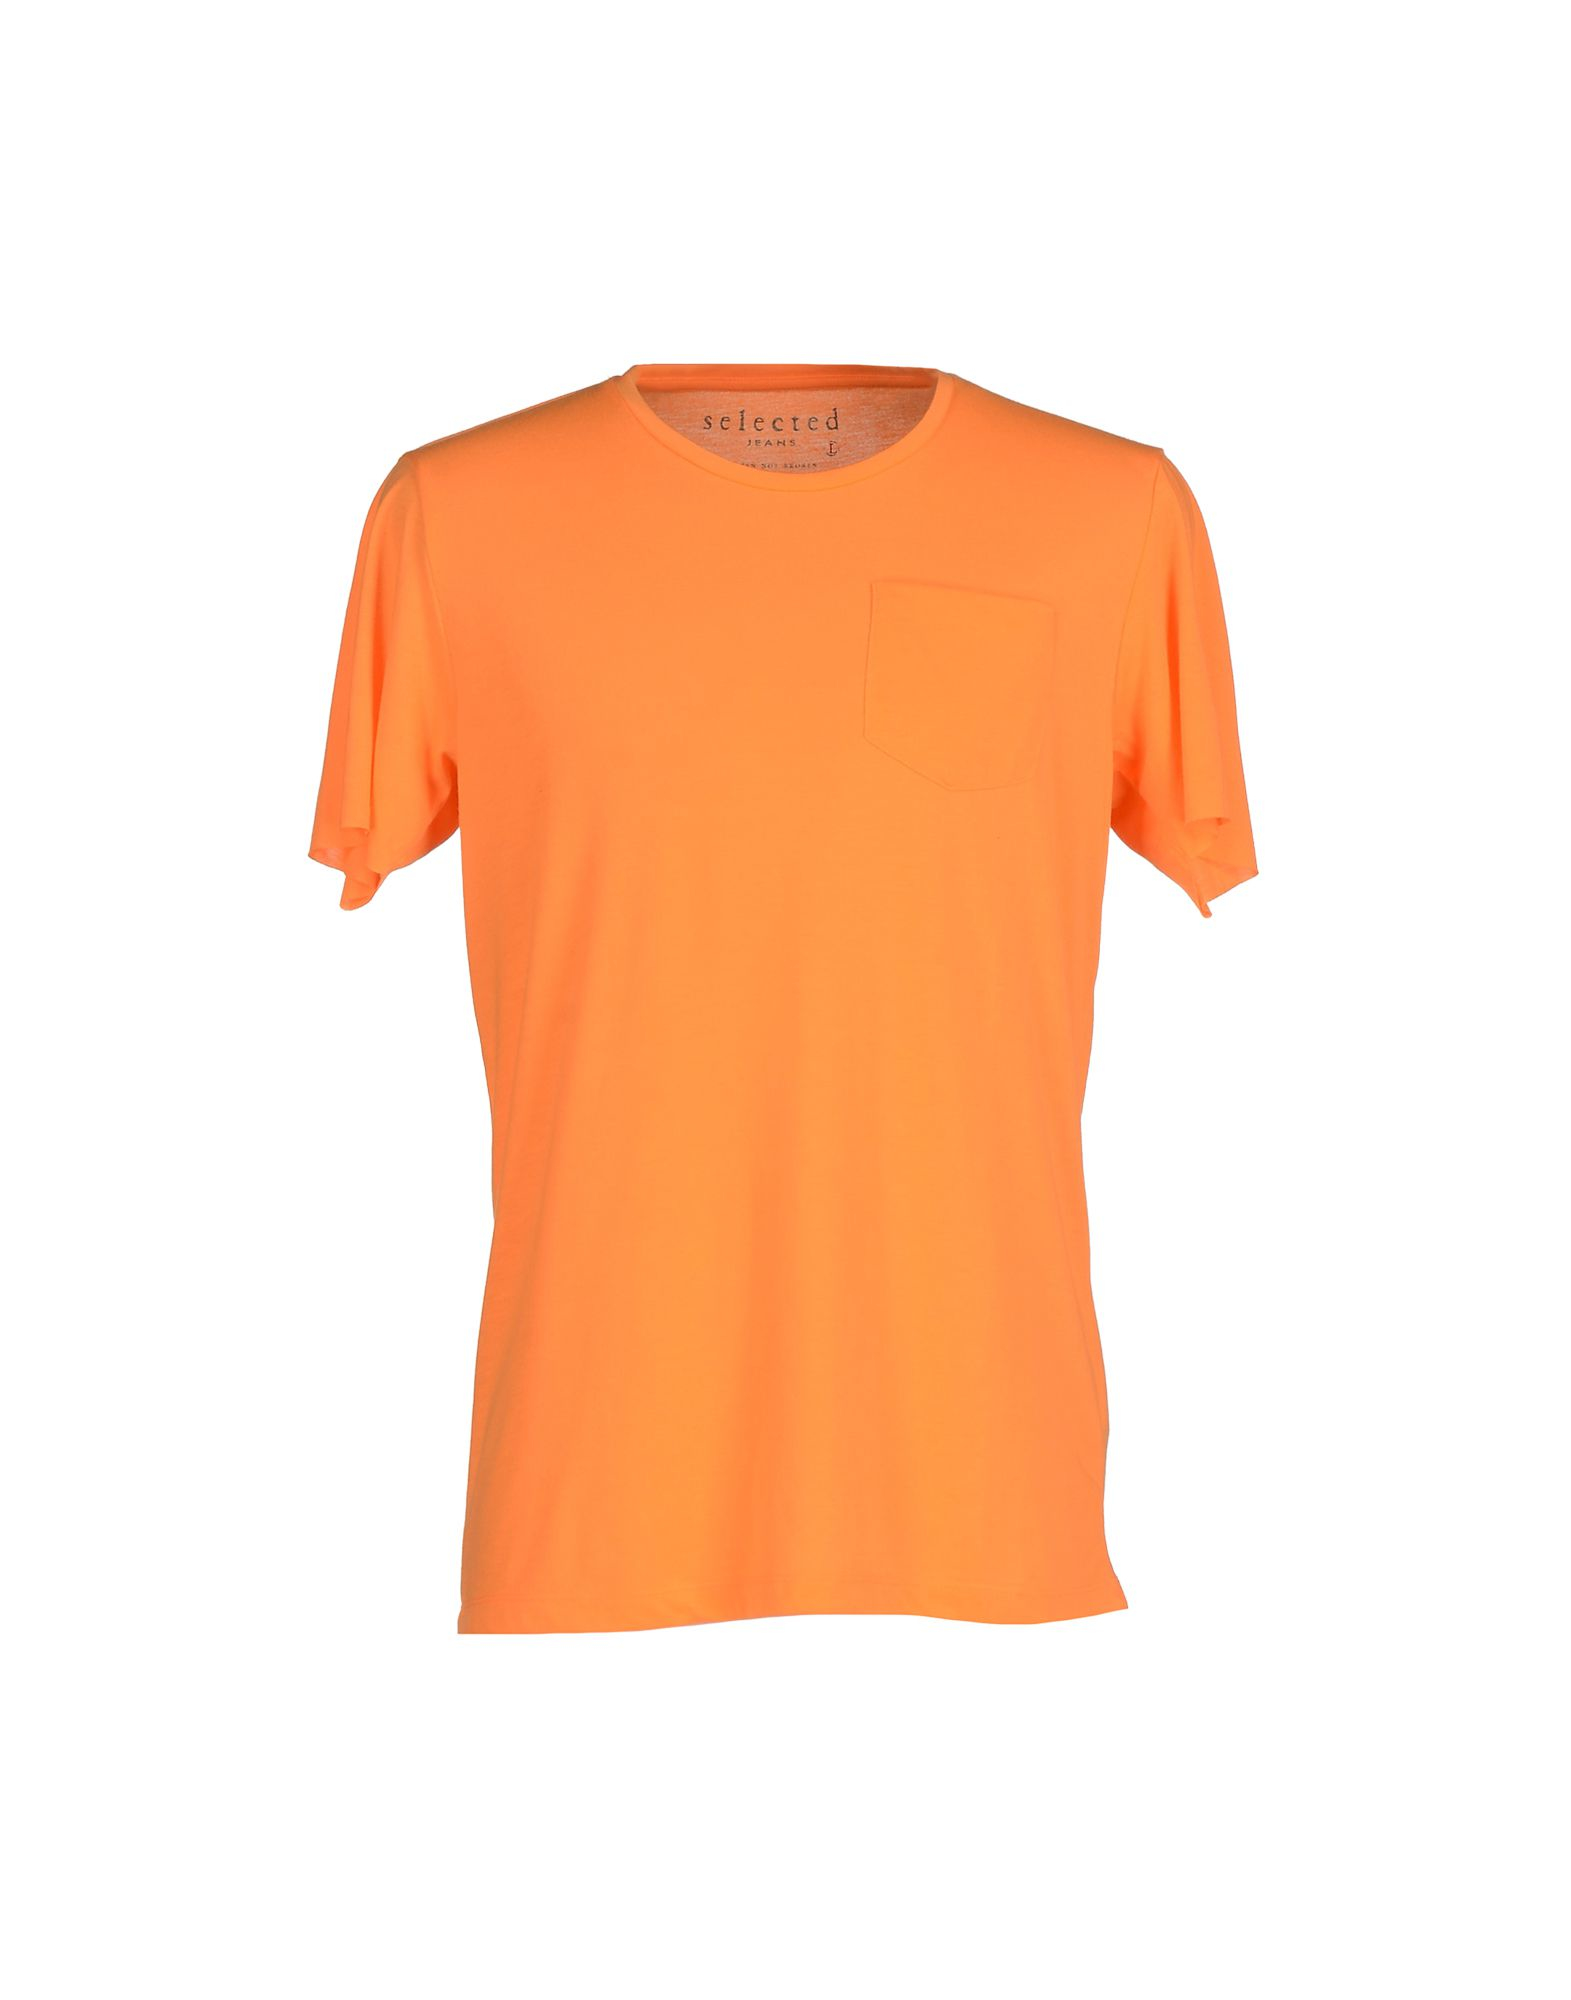 SELECTED Synthetic T-shirt in Orange for Men - Lyst